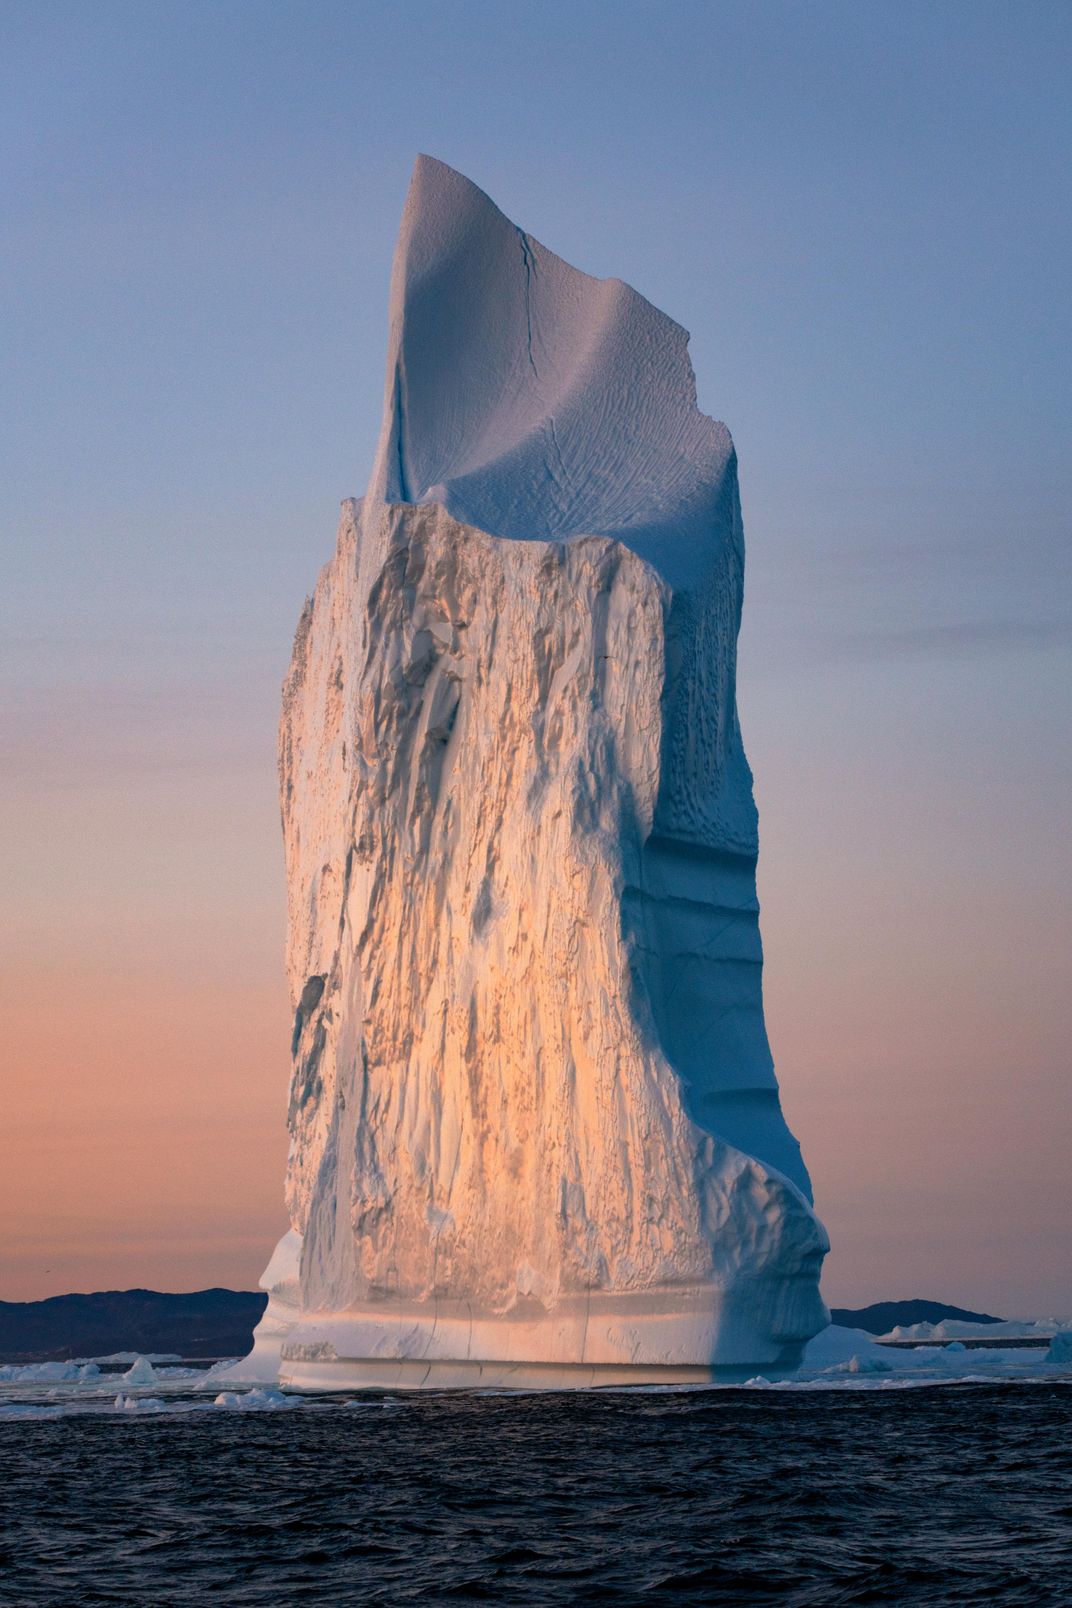 An iceberg in Disko Bay, Greenland. It stands about 40-50 feet tall.